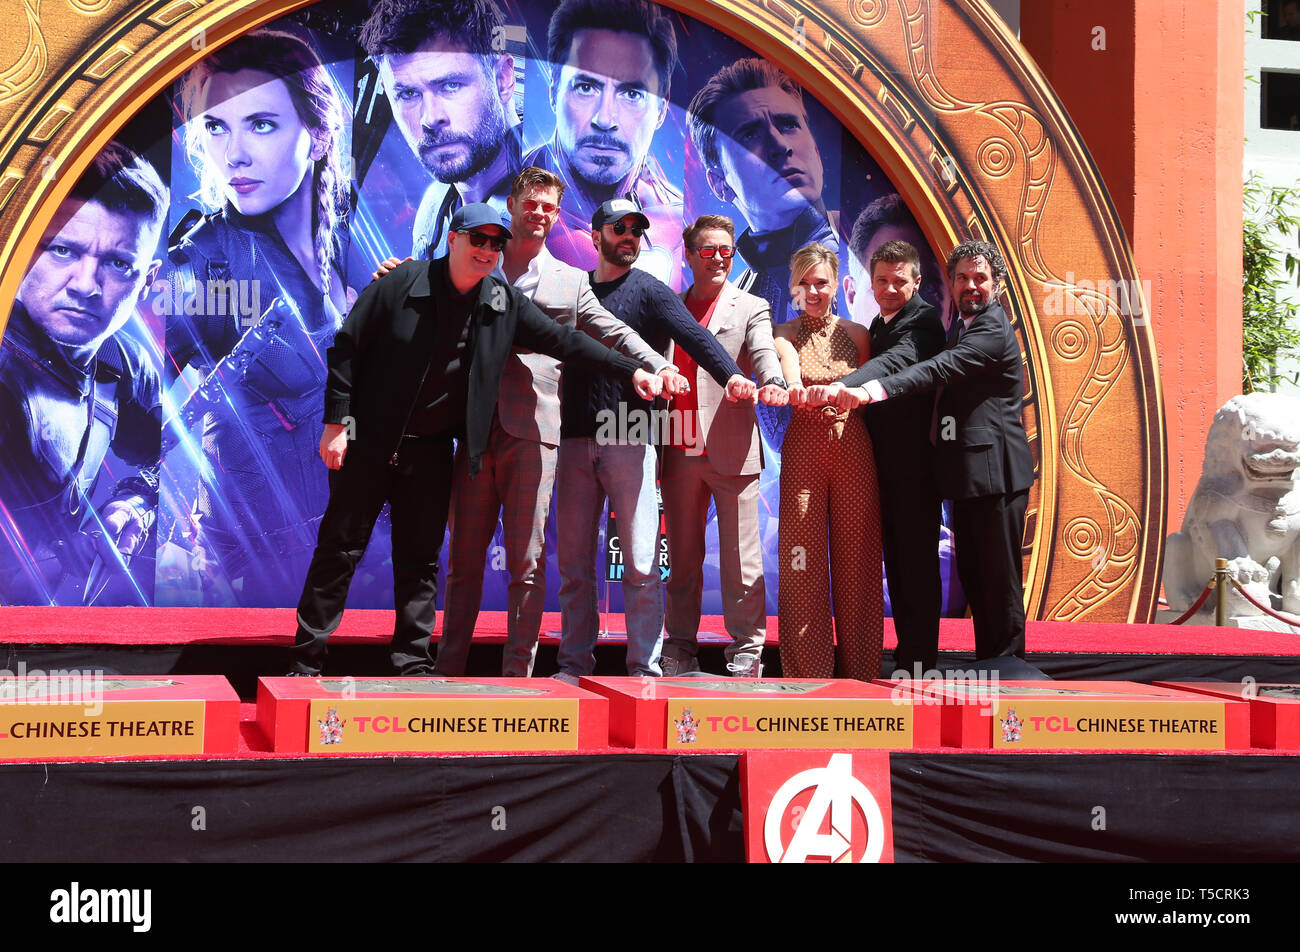 Hollywood, Ca. 23rd Apr, 2019. Kevin Feige, Chris Hemsworth, Chris Evans, Robert Downey Jr., Scarlett Johansson, Mark Ruffalo, Jeremy Renner, at the Marvel Studios' Avengers: Endgame Cast Handprint Ceremony at the TCL Chinese Theatre IMAX in Hollywood, California on April 23, 2019. Credit: Faye Sadou/Media Punch/Alamy Live News Stock Photo